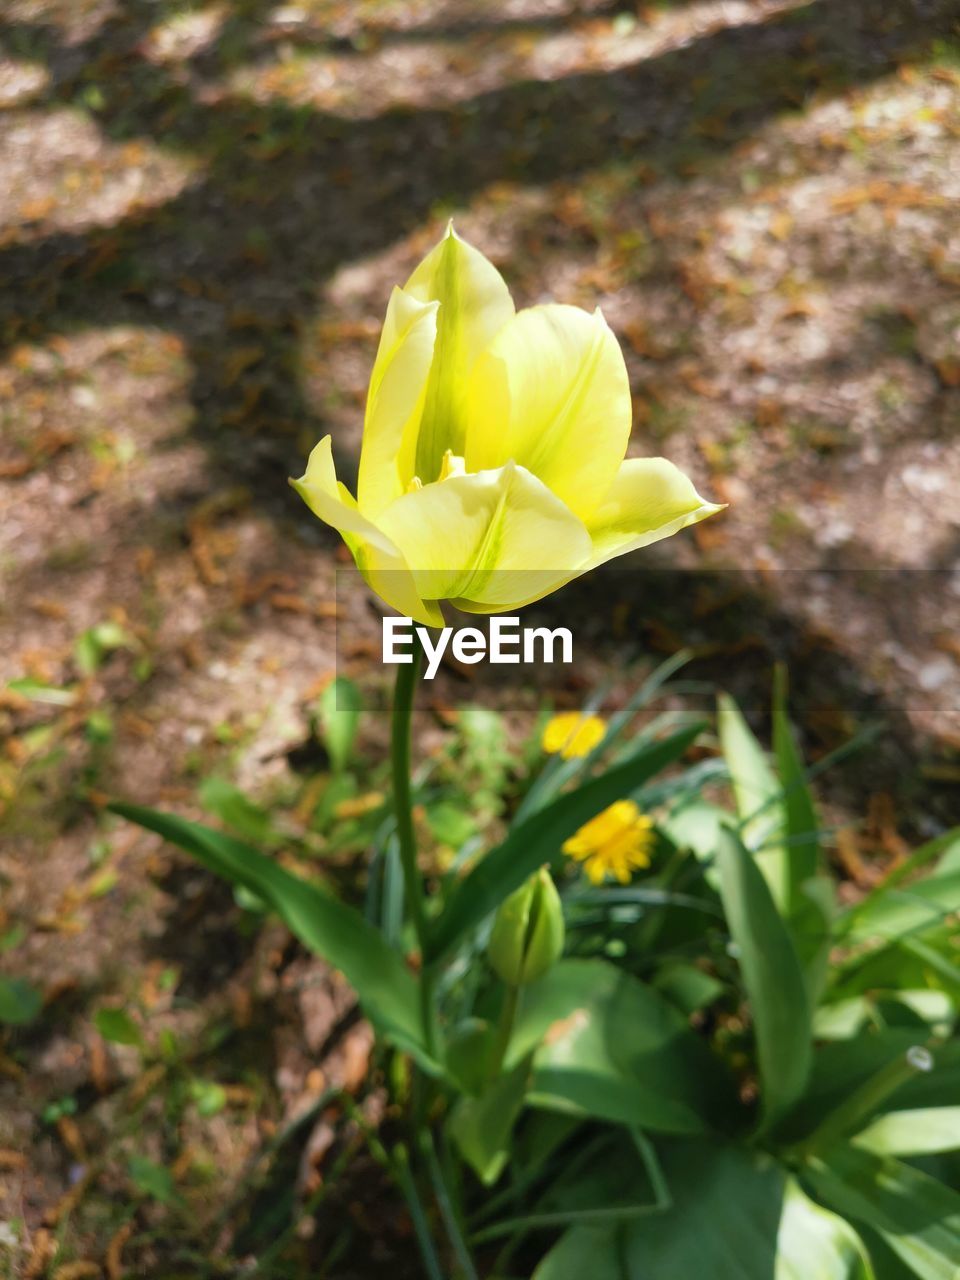 plant, flowering plant, flower, yellow, beauty in nature, freshness, growth, petal, fragility, nature, close-up, flower head, inflorescence, no people, leaf, plant part, focus on foreground, day, springtime, wildflower, outdoors, blossom, green, land, sunlight, field, botany, tulip, plant stem